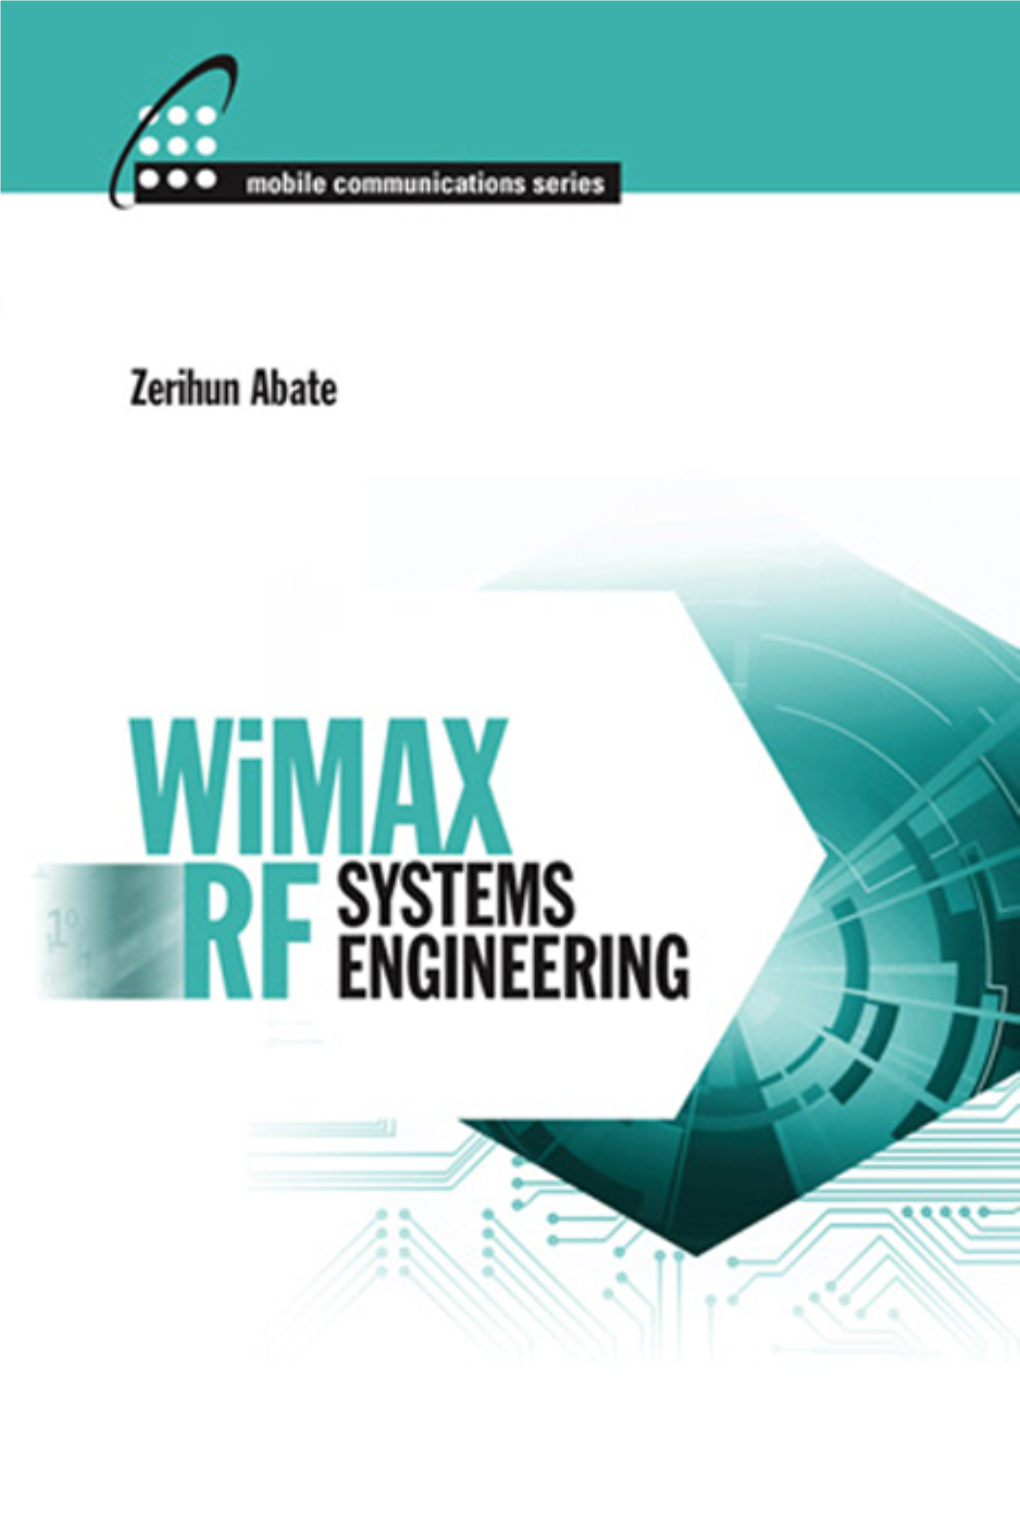 Wimax RF Systems Engineering for a List of Titles in the Artech House Mobile Communications Series, Turn to the Back of This Book